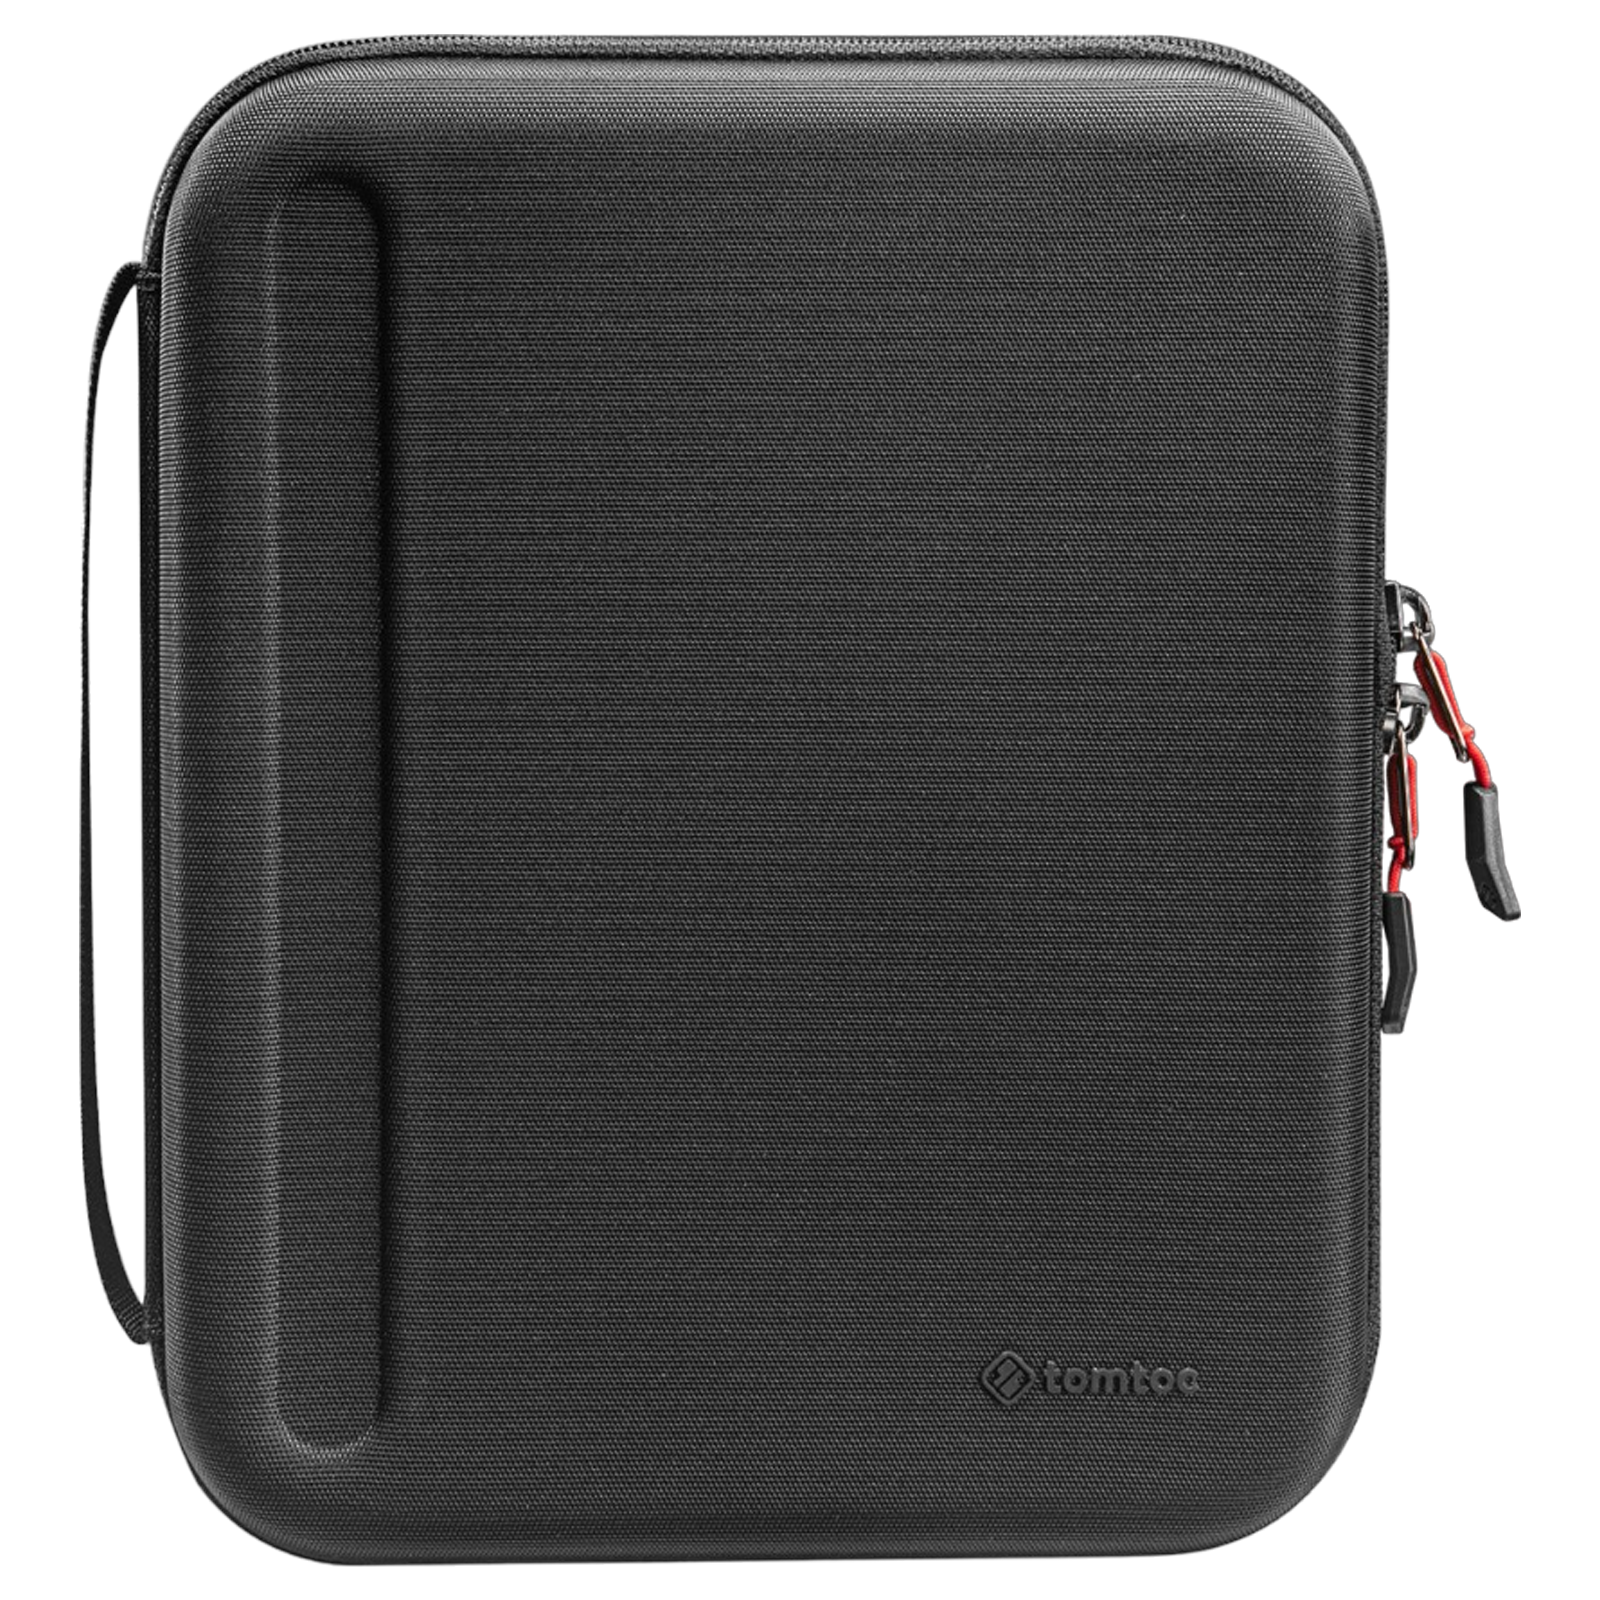 tomtoc B06 Polyester and EVA Case for Apple iPad Pro 12.9 Inch (Triple-layer Design, Black)